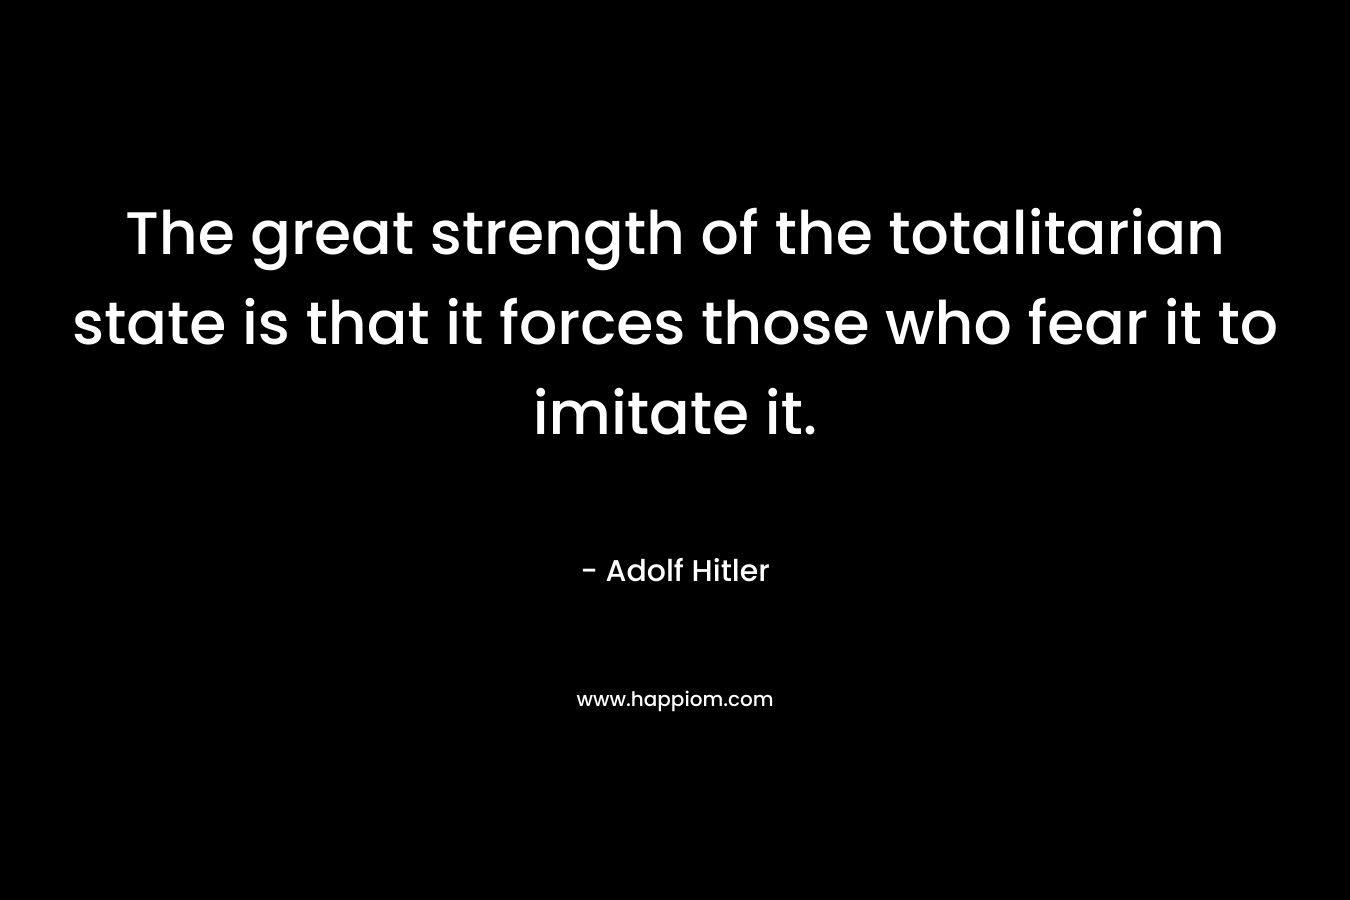 The great strength of the totalitarian state is that it forces those who fear it to imitate it. – Adolf Hitler